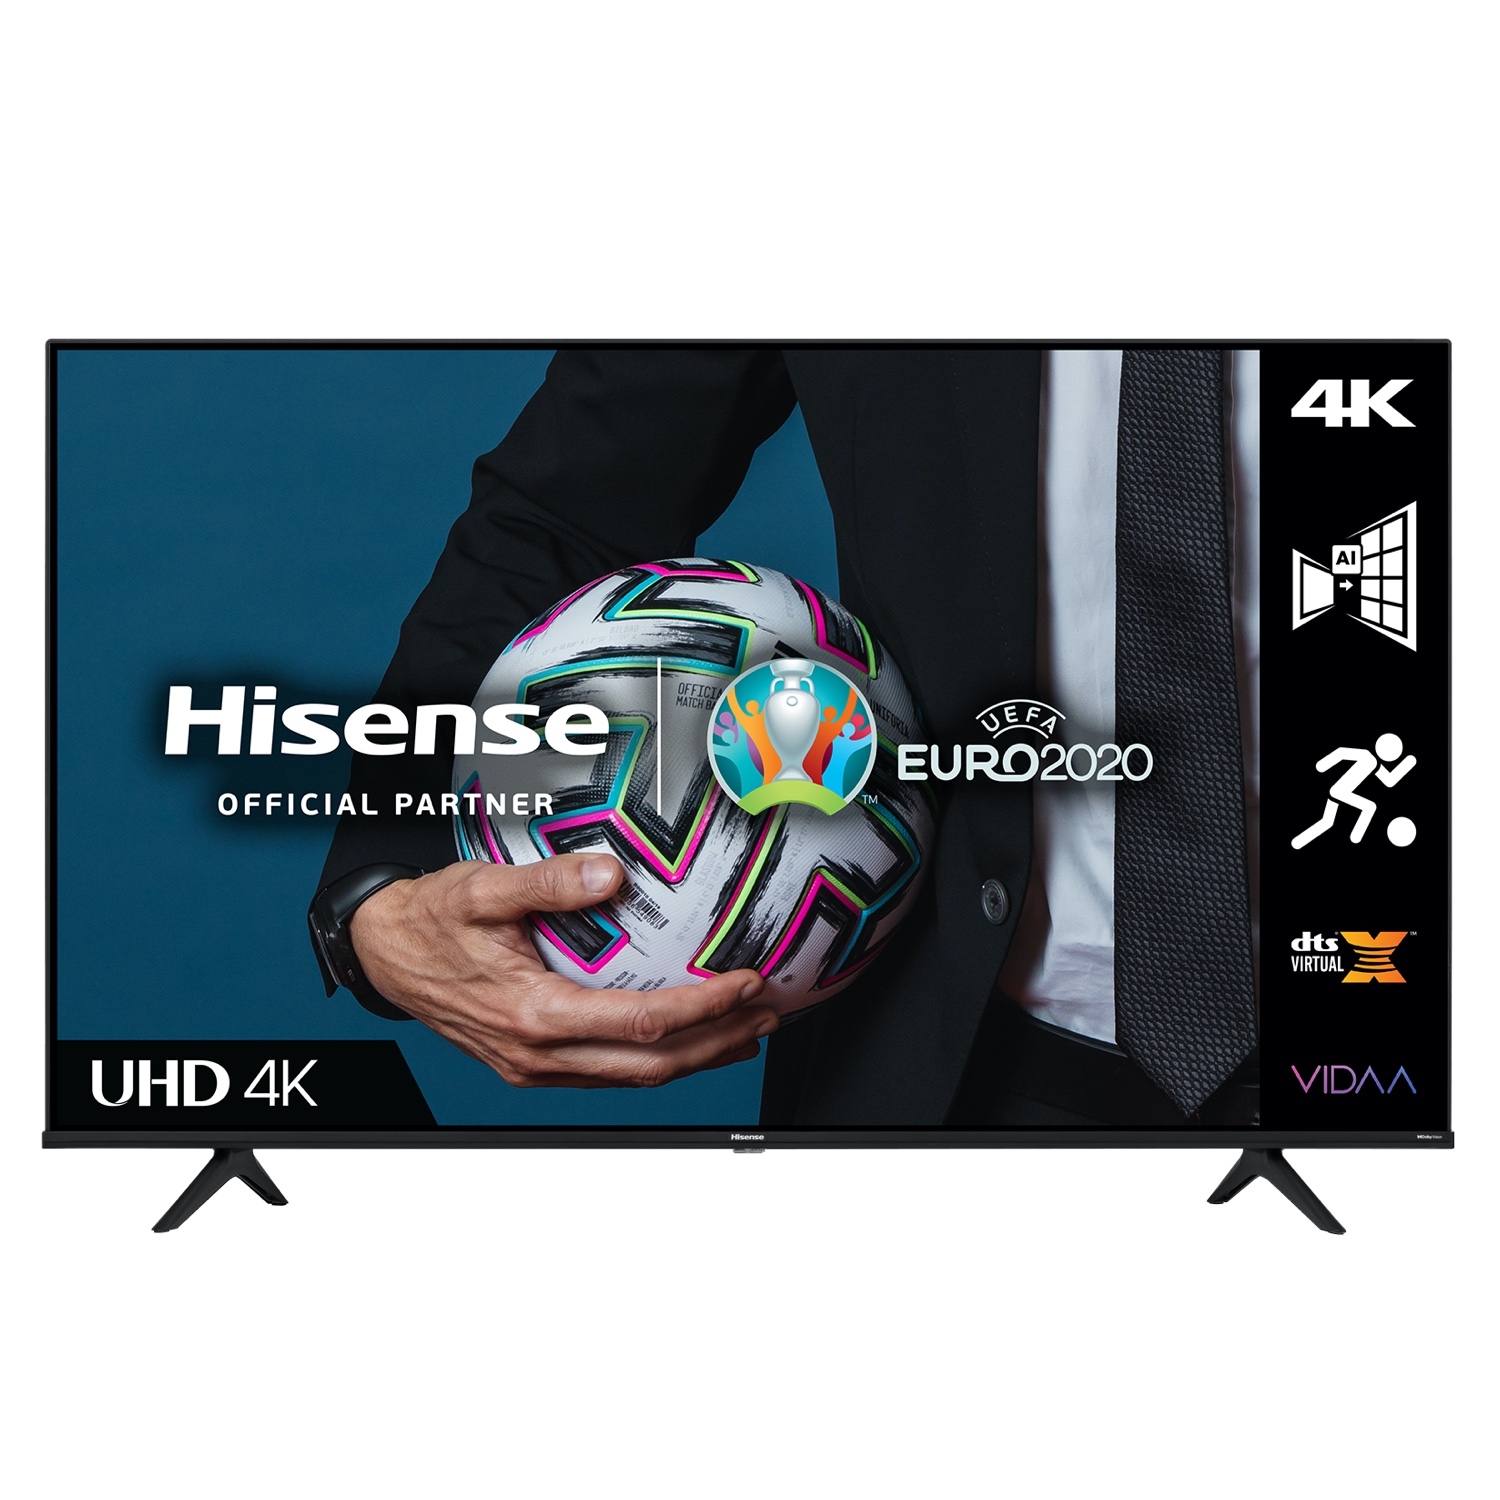 Hisense 50A6GTUK 50" 4K UHD HDR SMART TV with Alexa & Google Assistant and Dolby Vision - 0